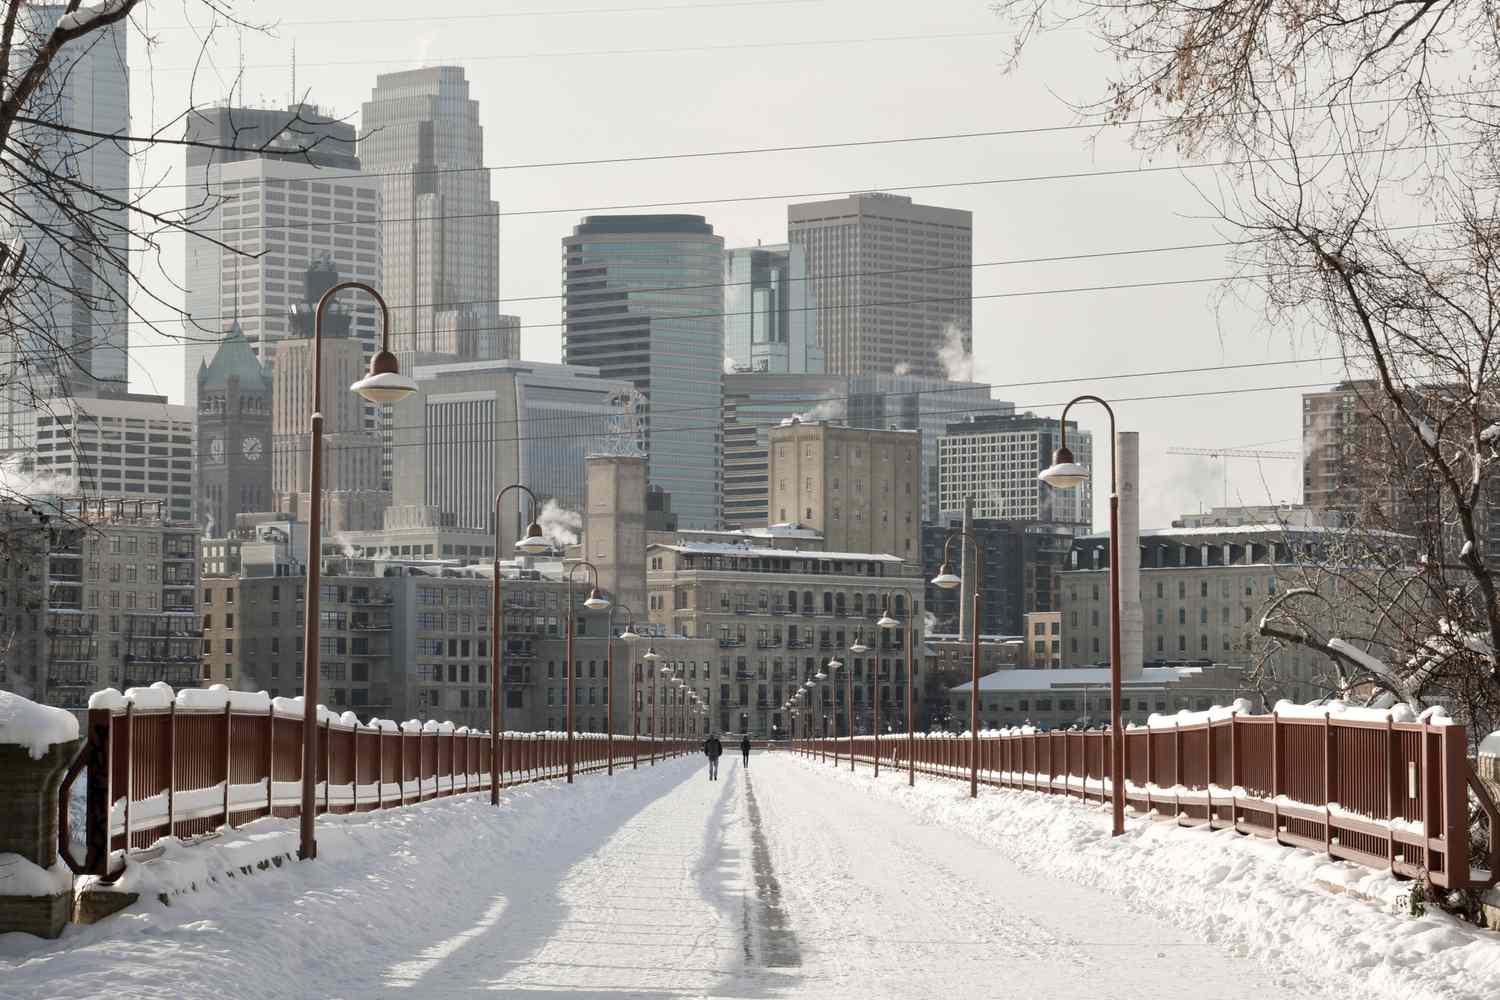 10 Facts About Local Legends And Folklore In Minneapolis, Minnesota